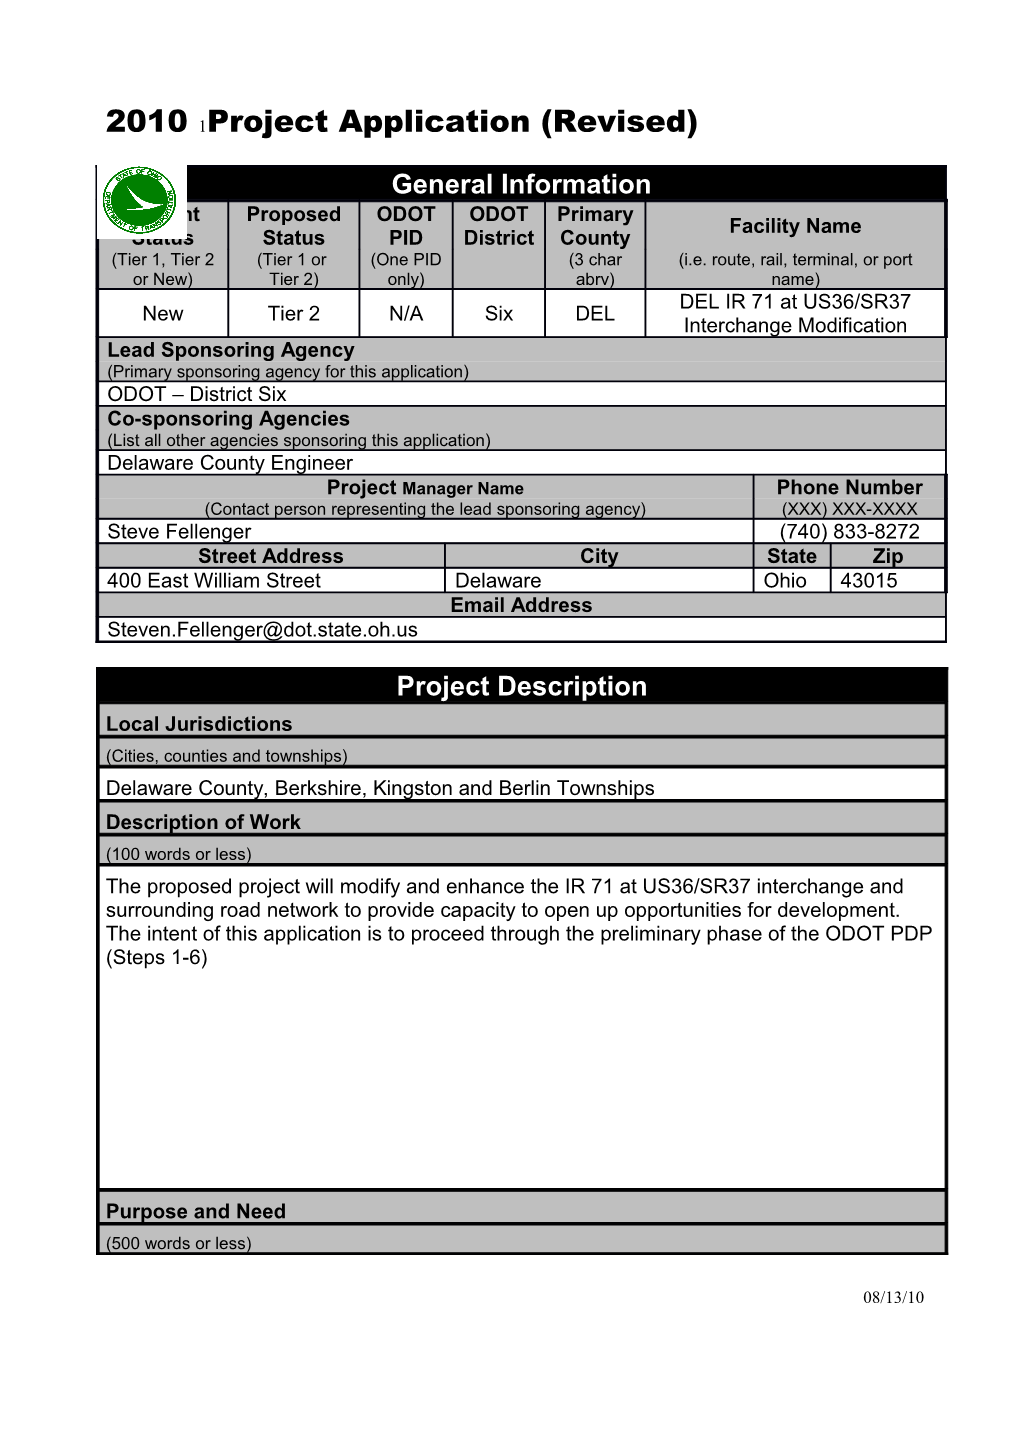 Updated 2010 TRAC - Revised Application